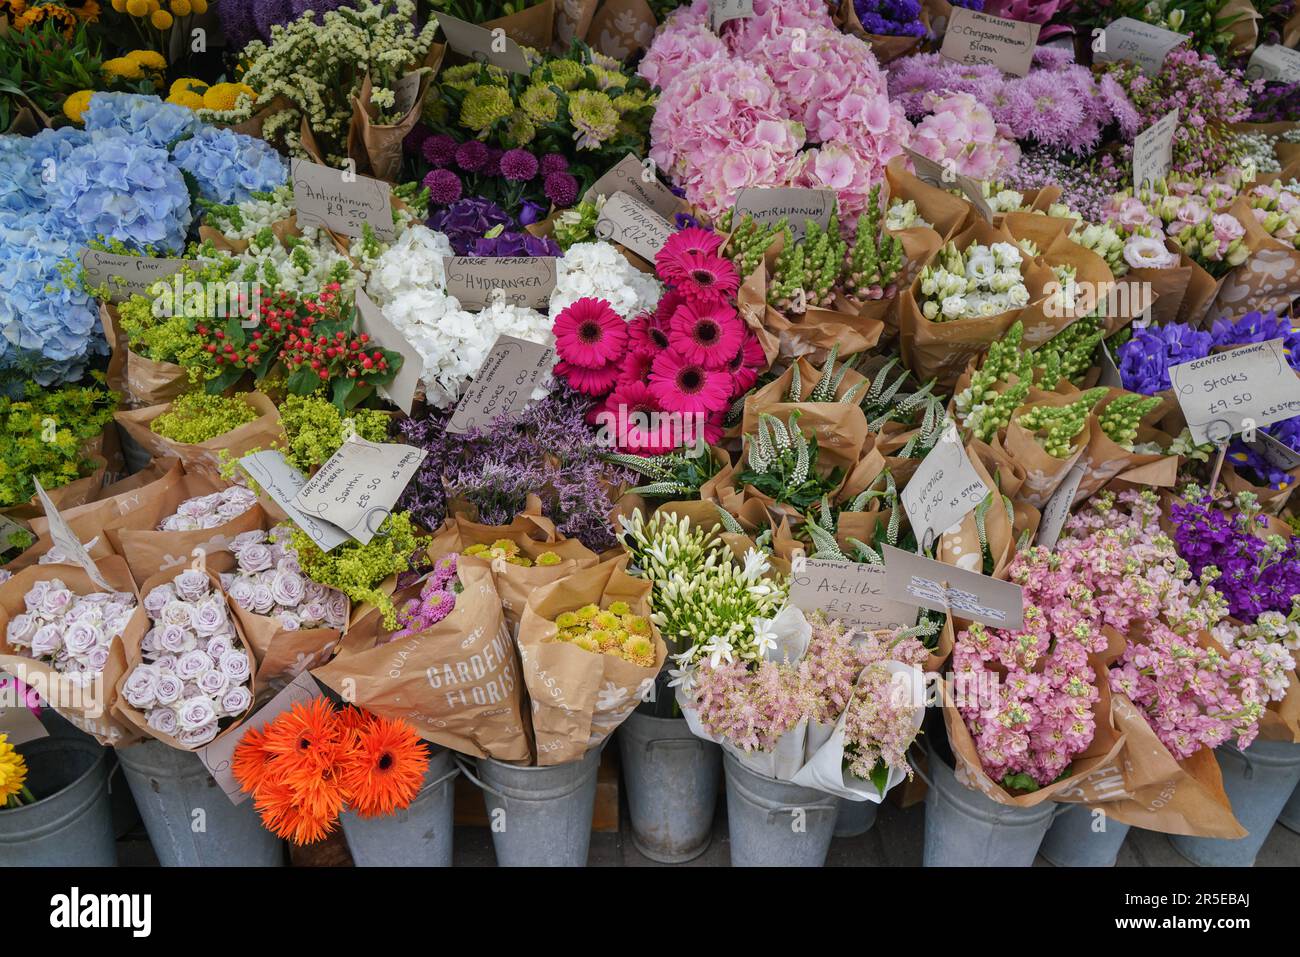 A variety of  flowers for sale at an outdoor market in Wimbledon, London, UK Stock Photo